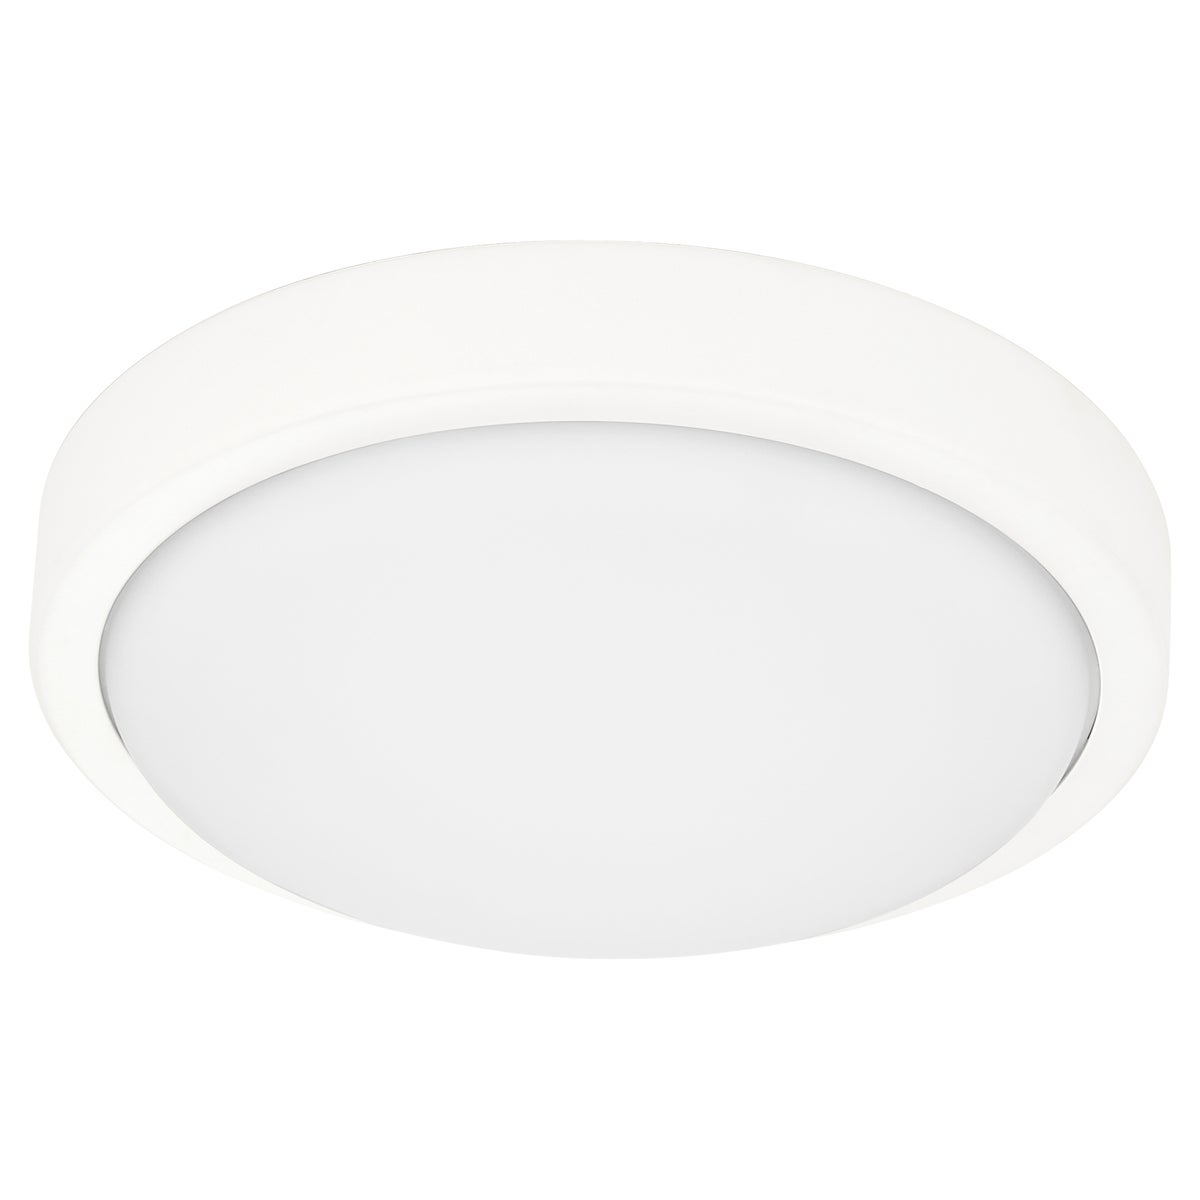 A white round LED light fixture for modern ceiling fan. Suitable for all decor styles. Energy-efficient, long-lasting. Quorum International brand. 24W, dimmable, UL Listed. 2-year warranty. Dimensions: 8.75"W x 2.25"H.